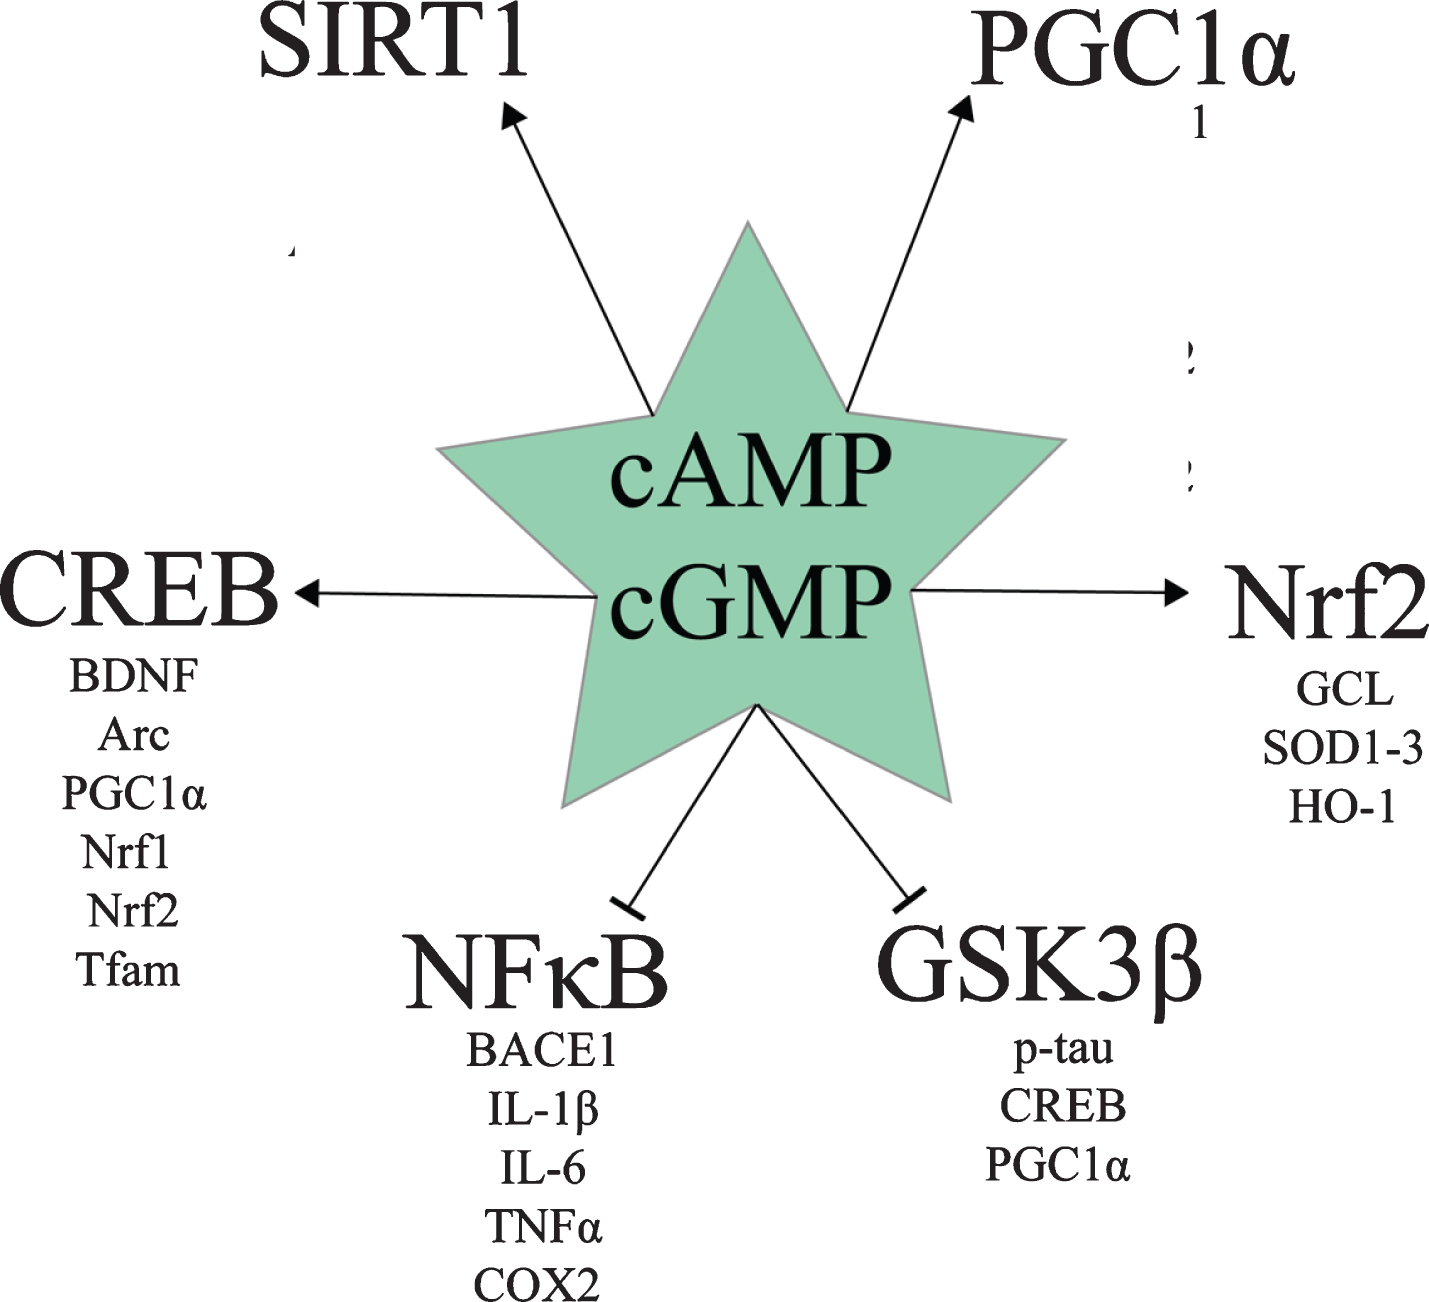 Downstream targets of cAMP and cGMP signaling relevant to AD.